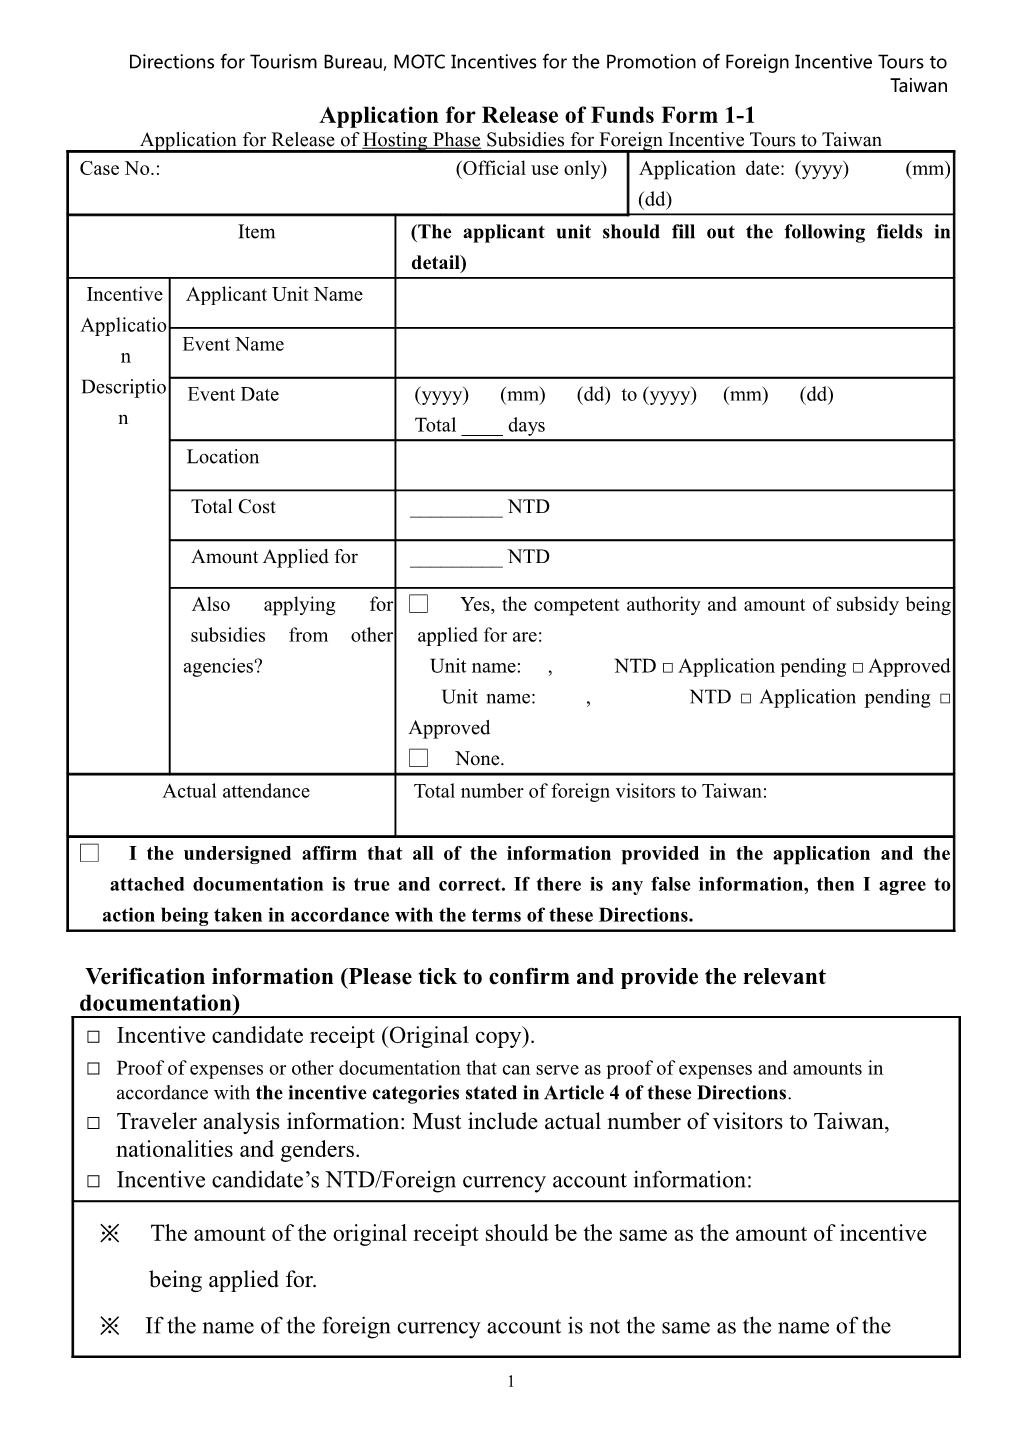 Application for Release of Funds Form 1-1